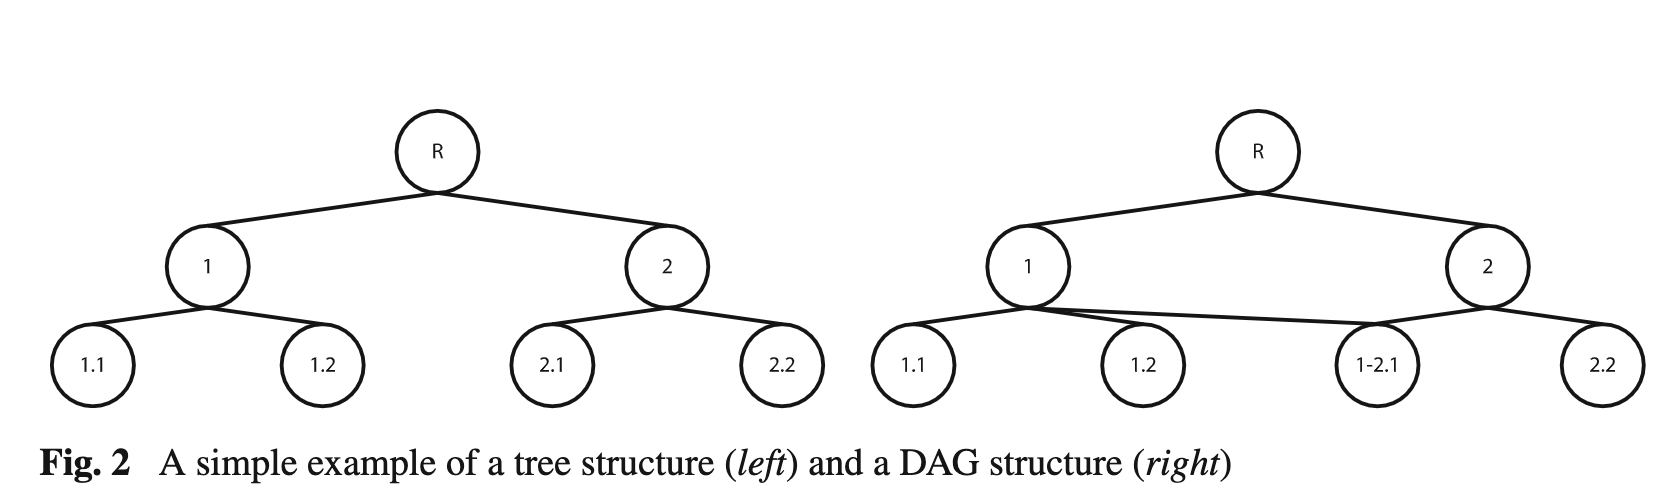 Figure 2 in Silla2011, showing the difference between tree taxonomy and DAG taxonomy.